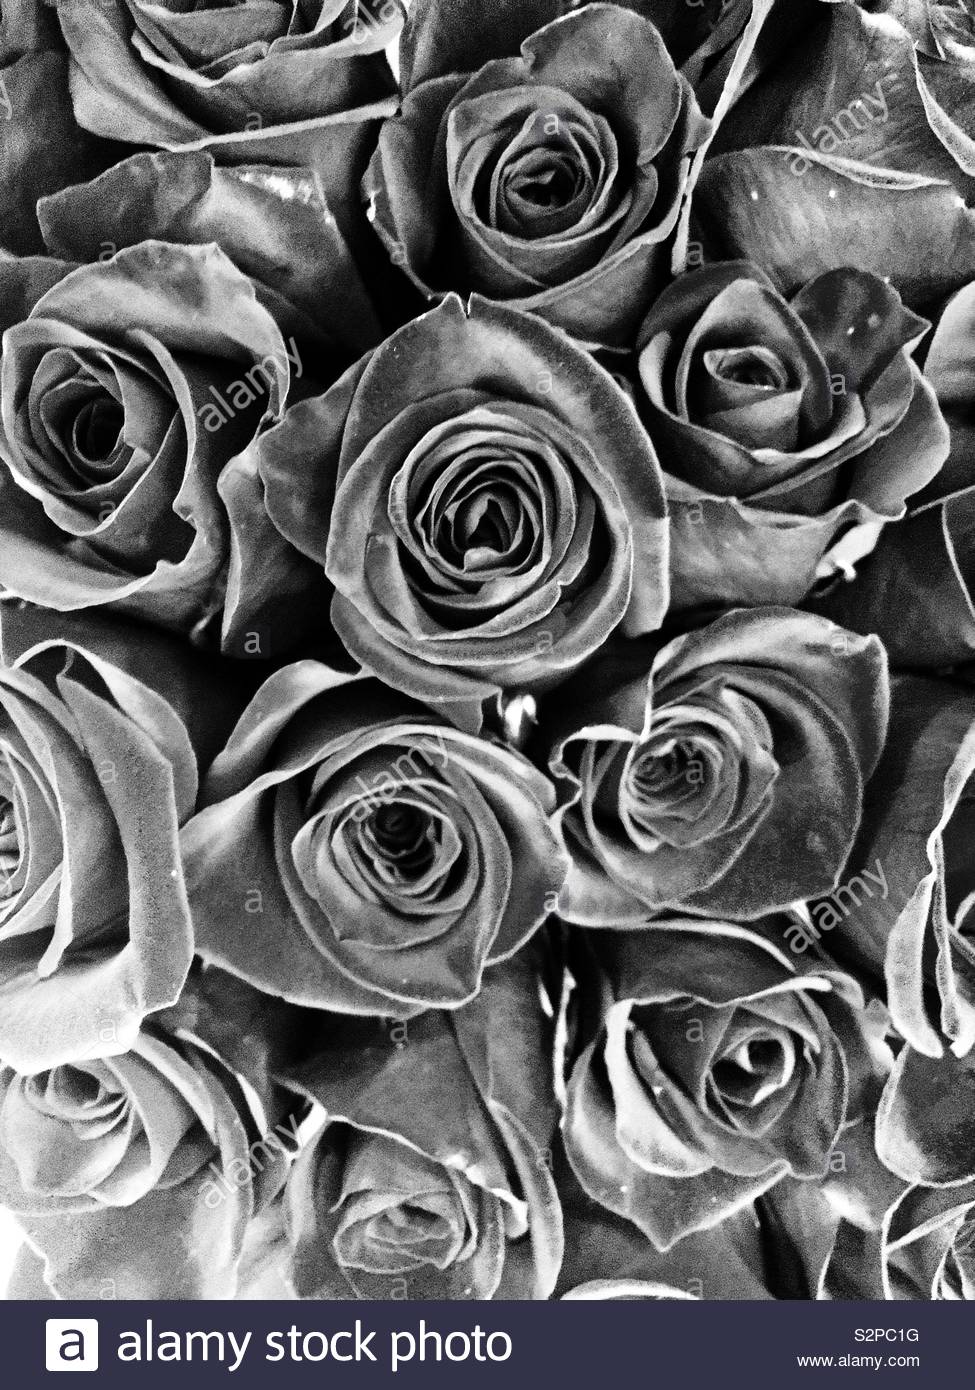 Beautiful bouquet of fresh roses in full bloom and black and white. Stock Photo